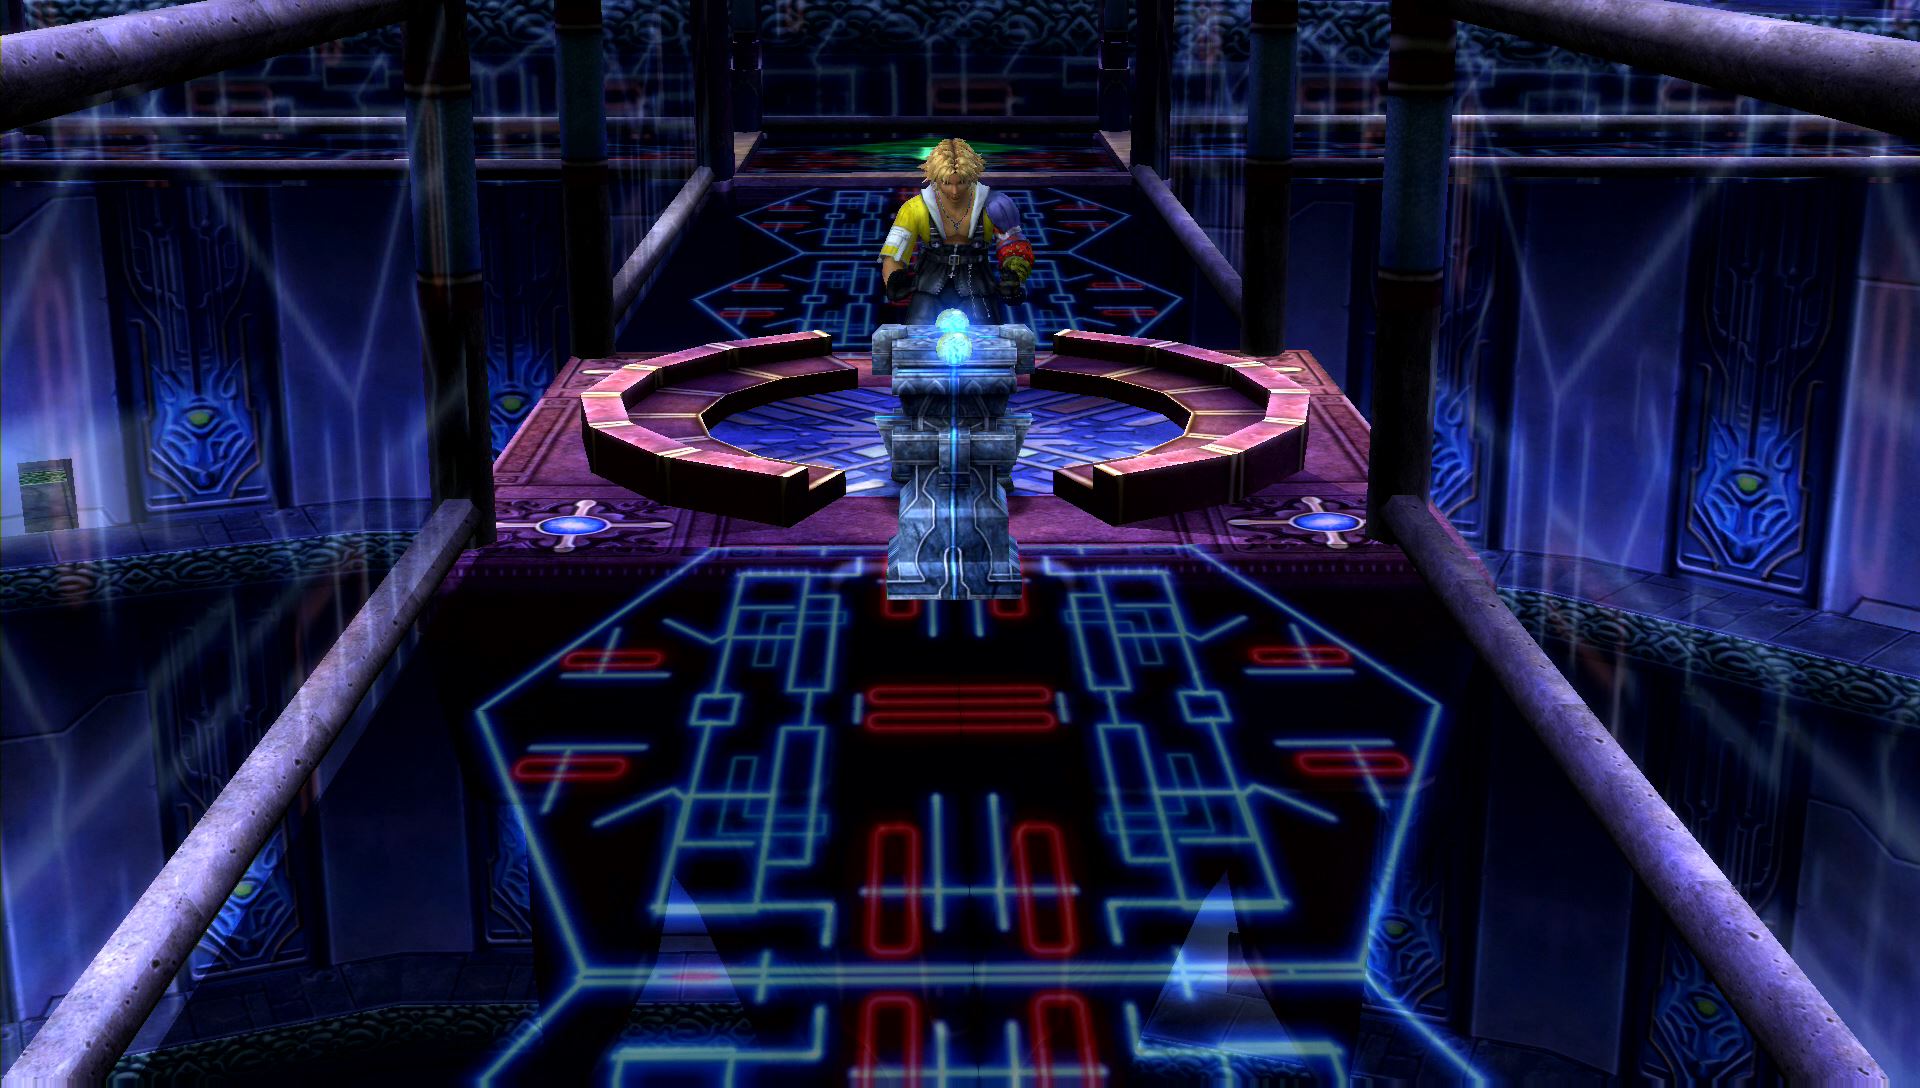 Игра в десятку. FFX Cloister of Trials головоломка. Sphere of Annihilation. A Cloister on Trial.